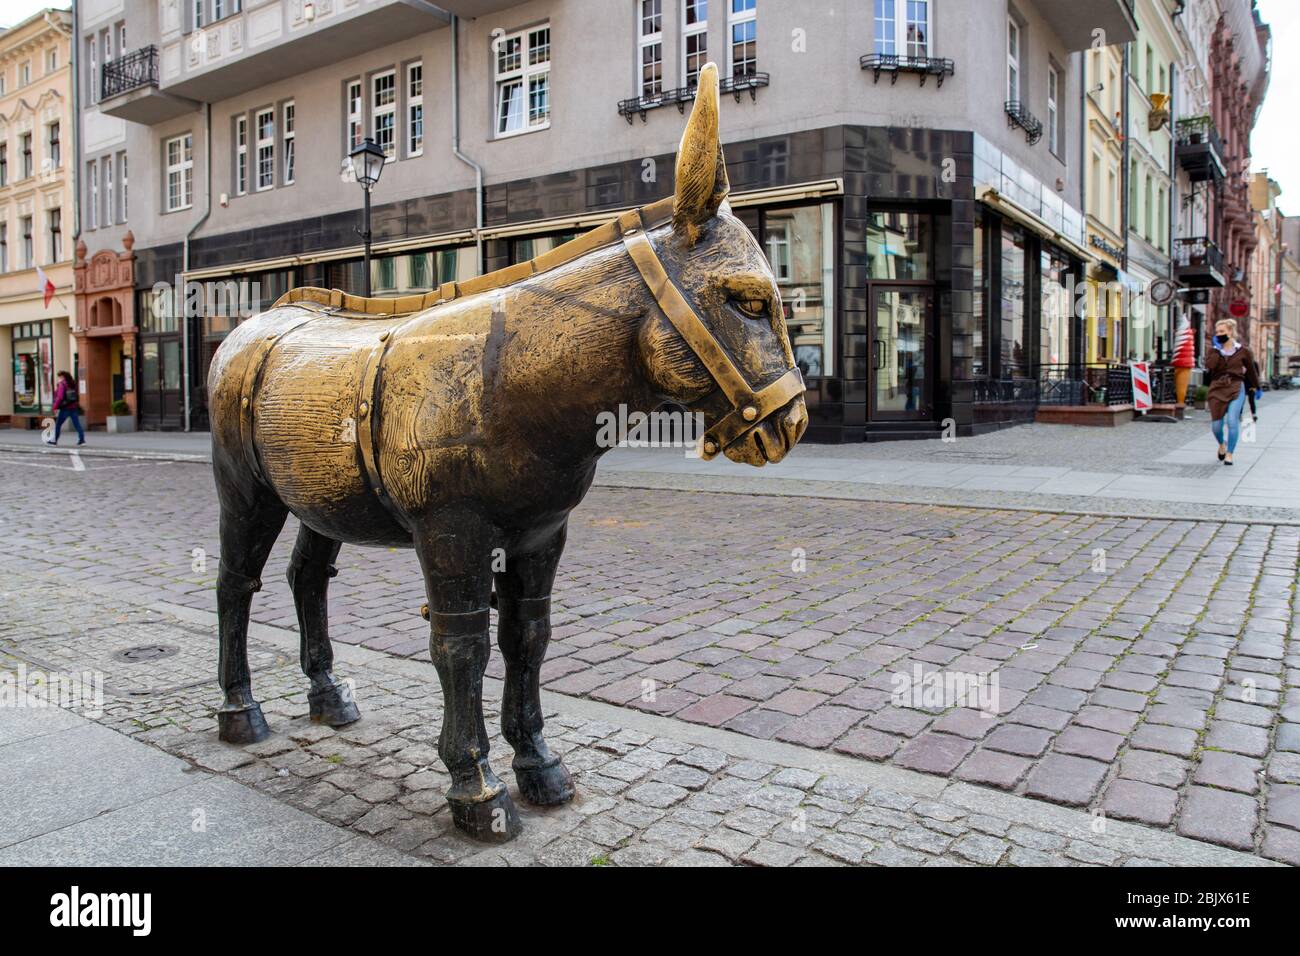 - Bronze Statue In Market High Resolution Stock Photography and Images - Alamy